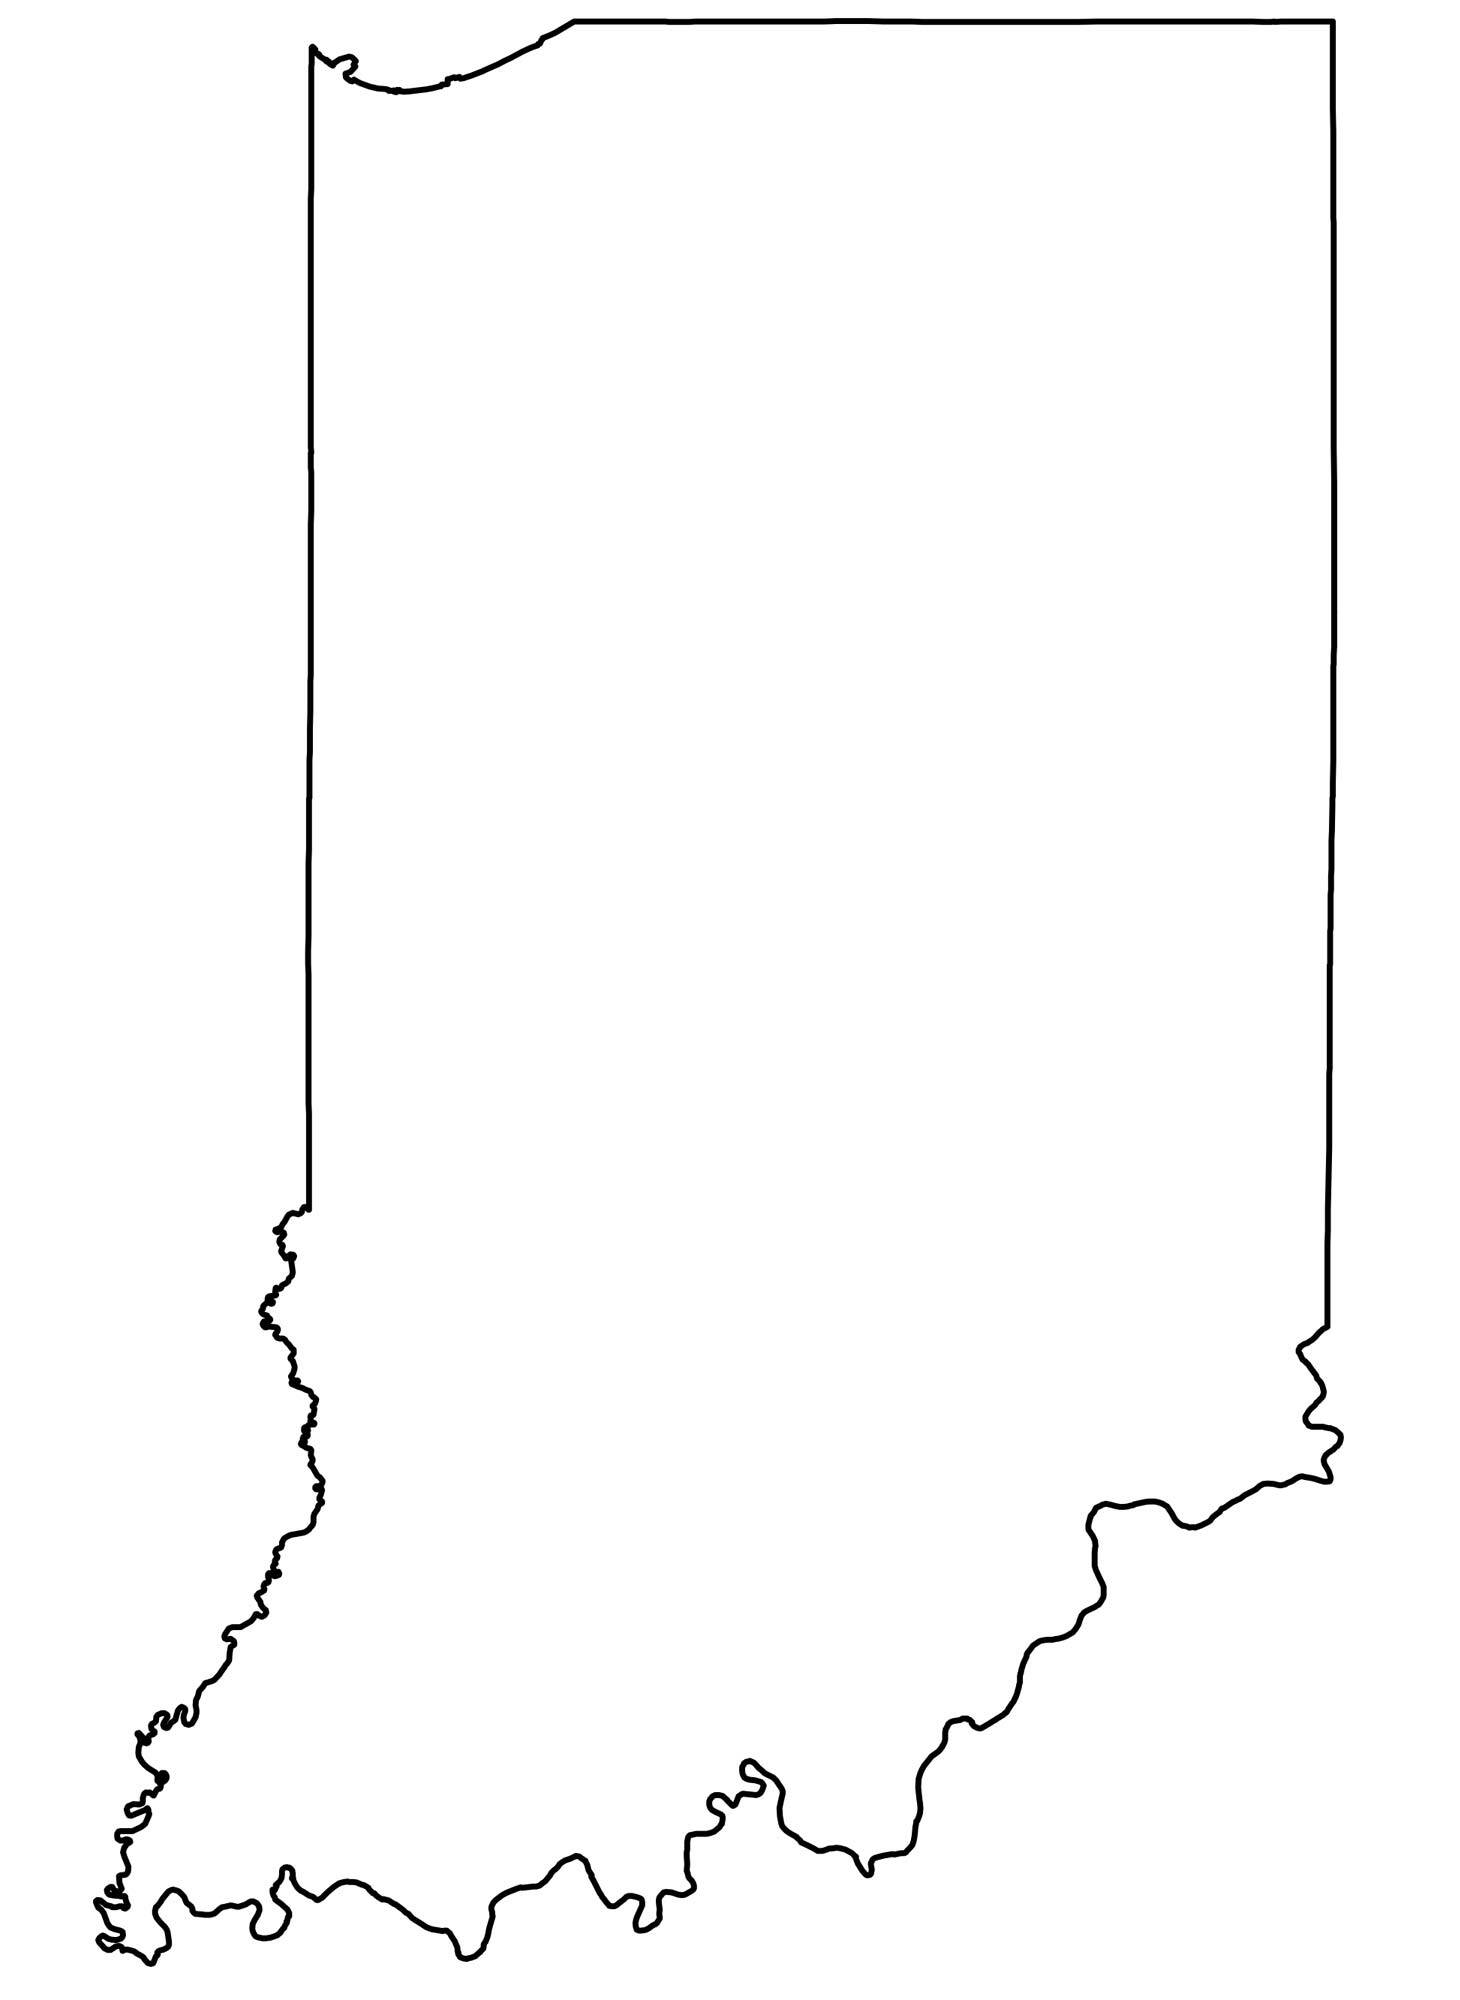 blank-map-of-indiana-map-of-indiana-lex-luthor-perdedor